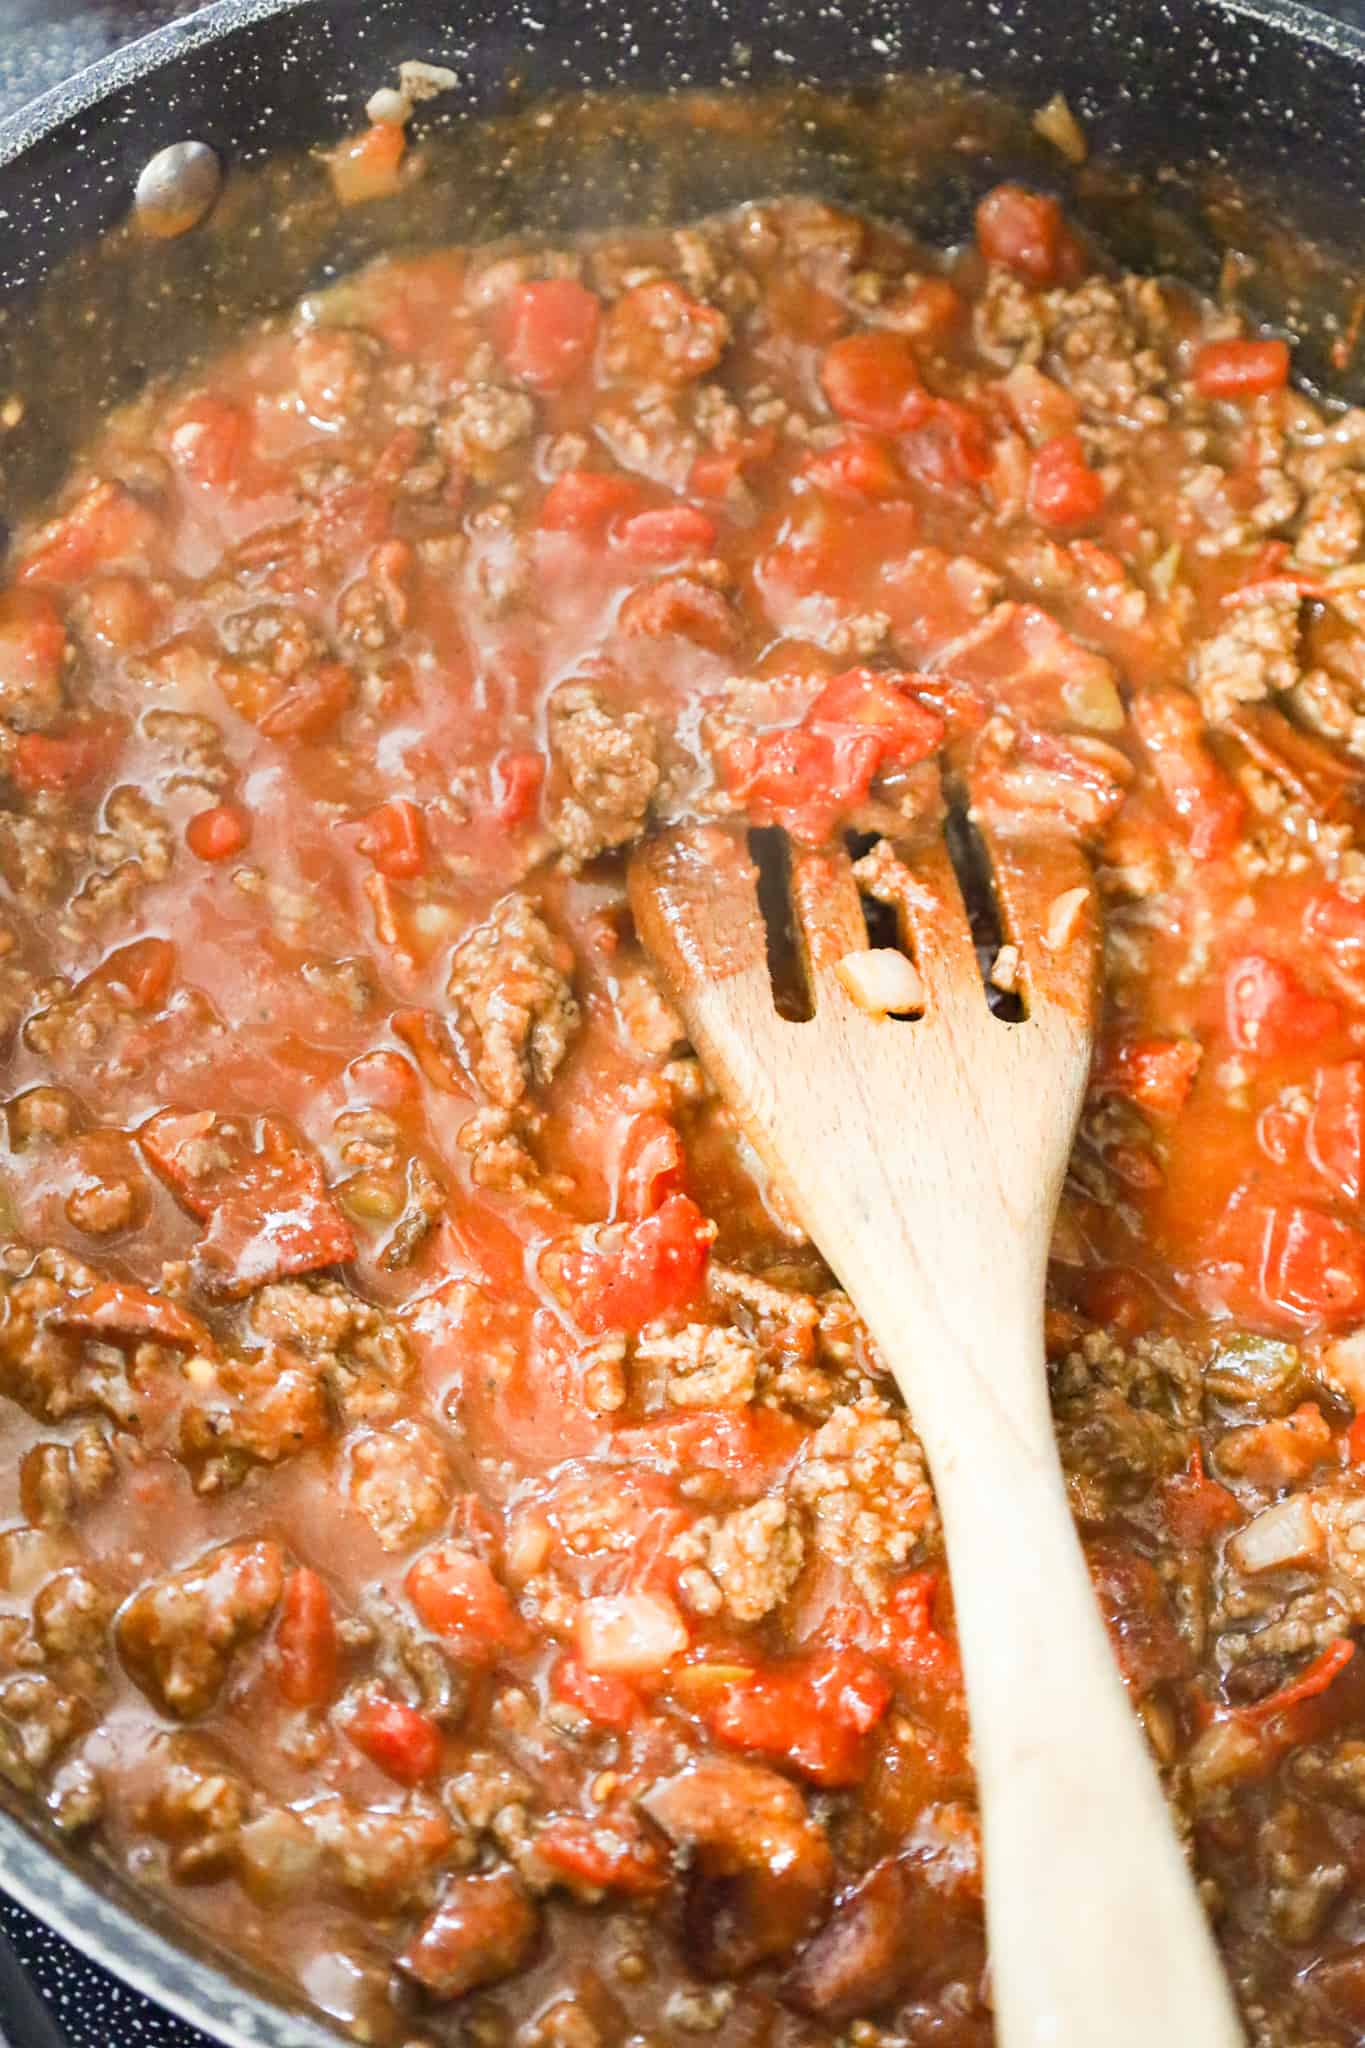 ground beef and sauce mixture in a skillet with diced tomatoes